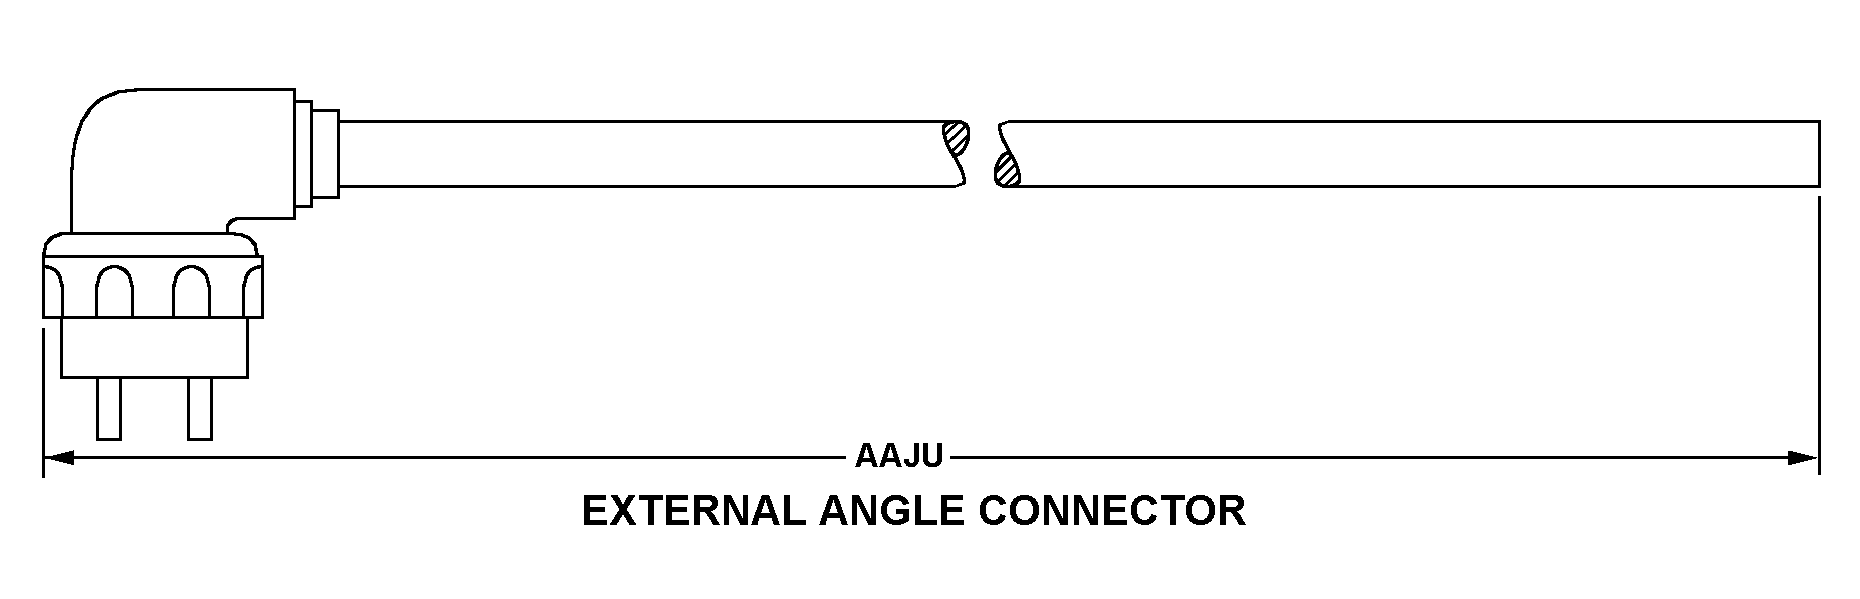 EXTERNAL ANGLE CONNECTOR style nsn 6150-01-260-7292